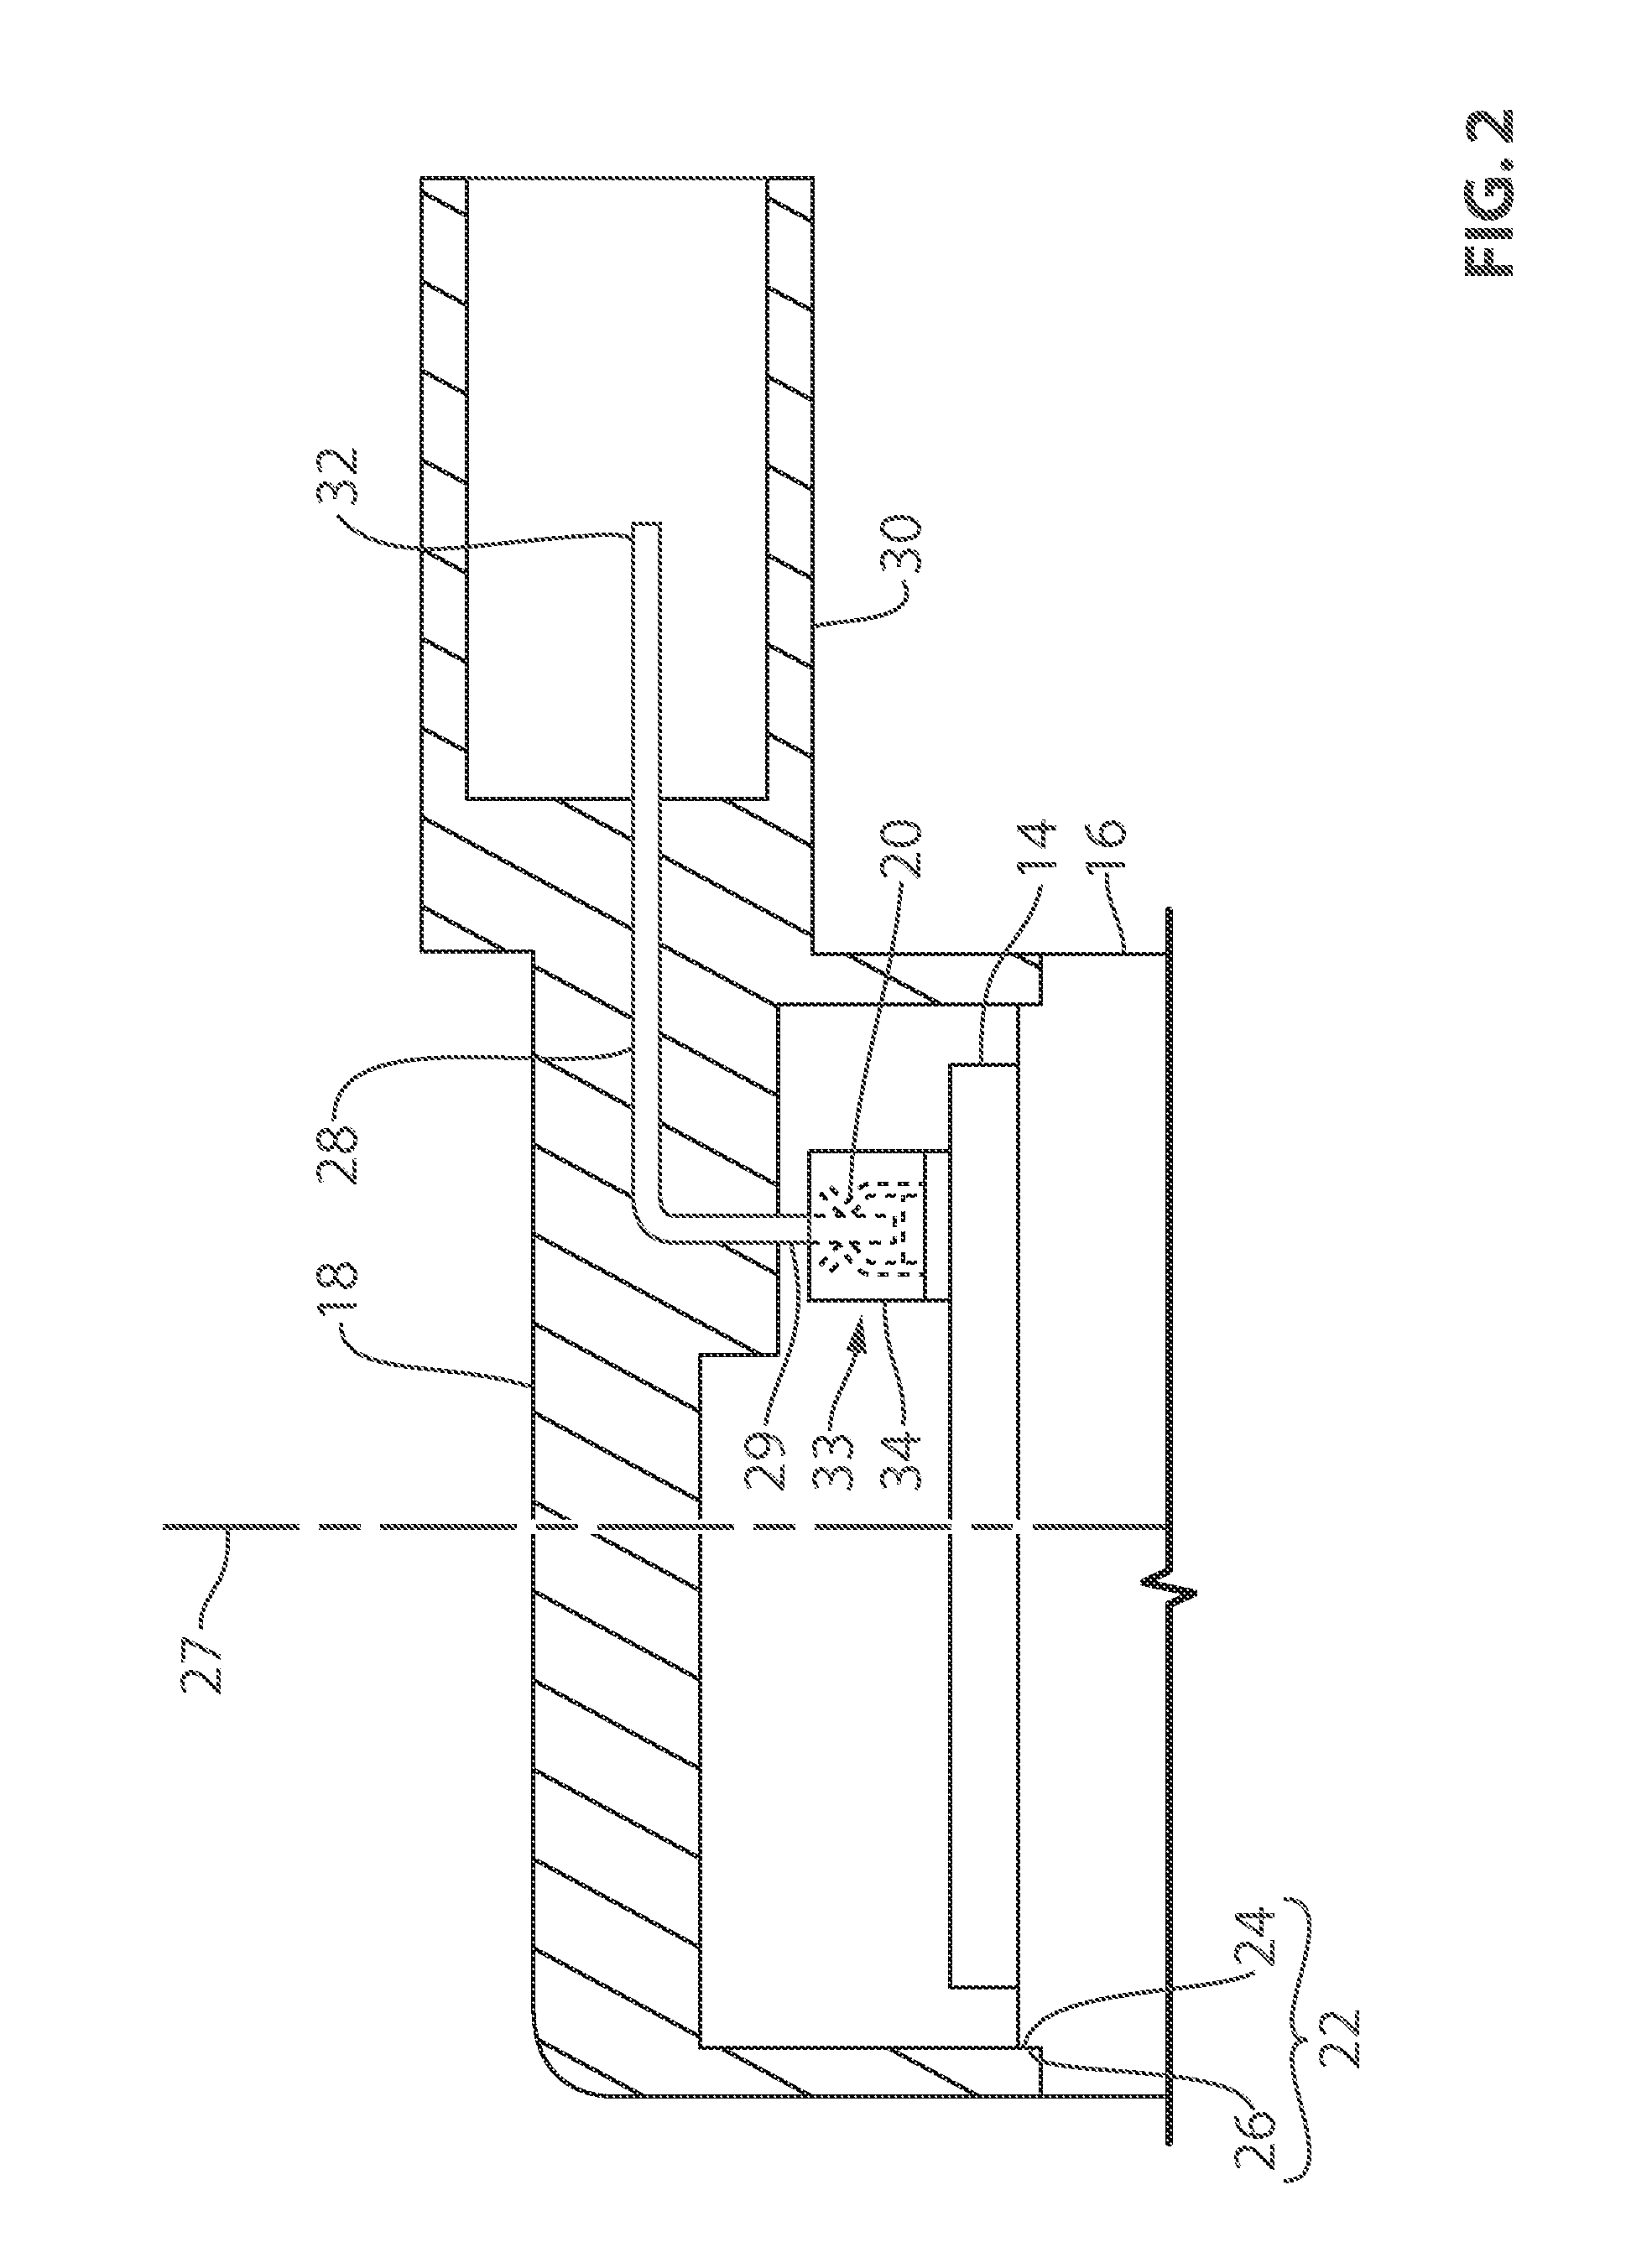 Vehicular camera with aligned housing members and electrical connection between aligned housing members